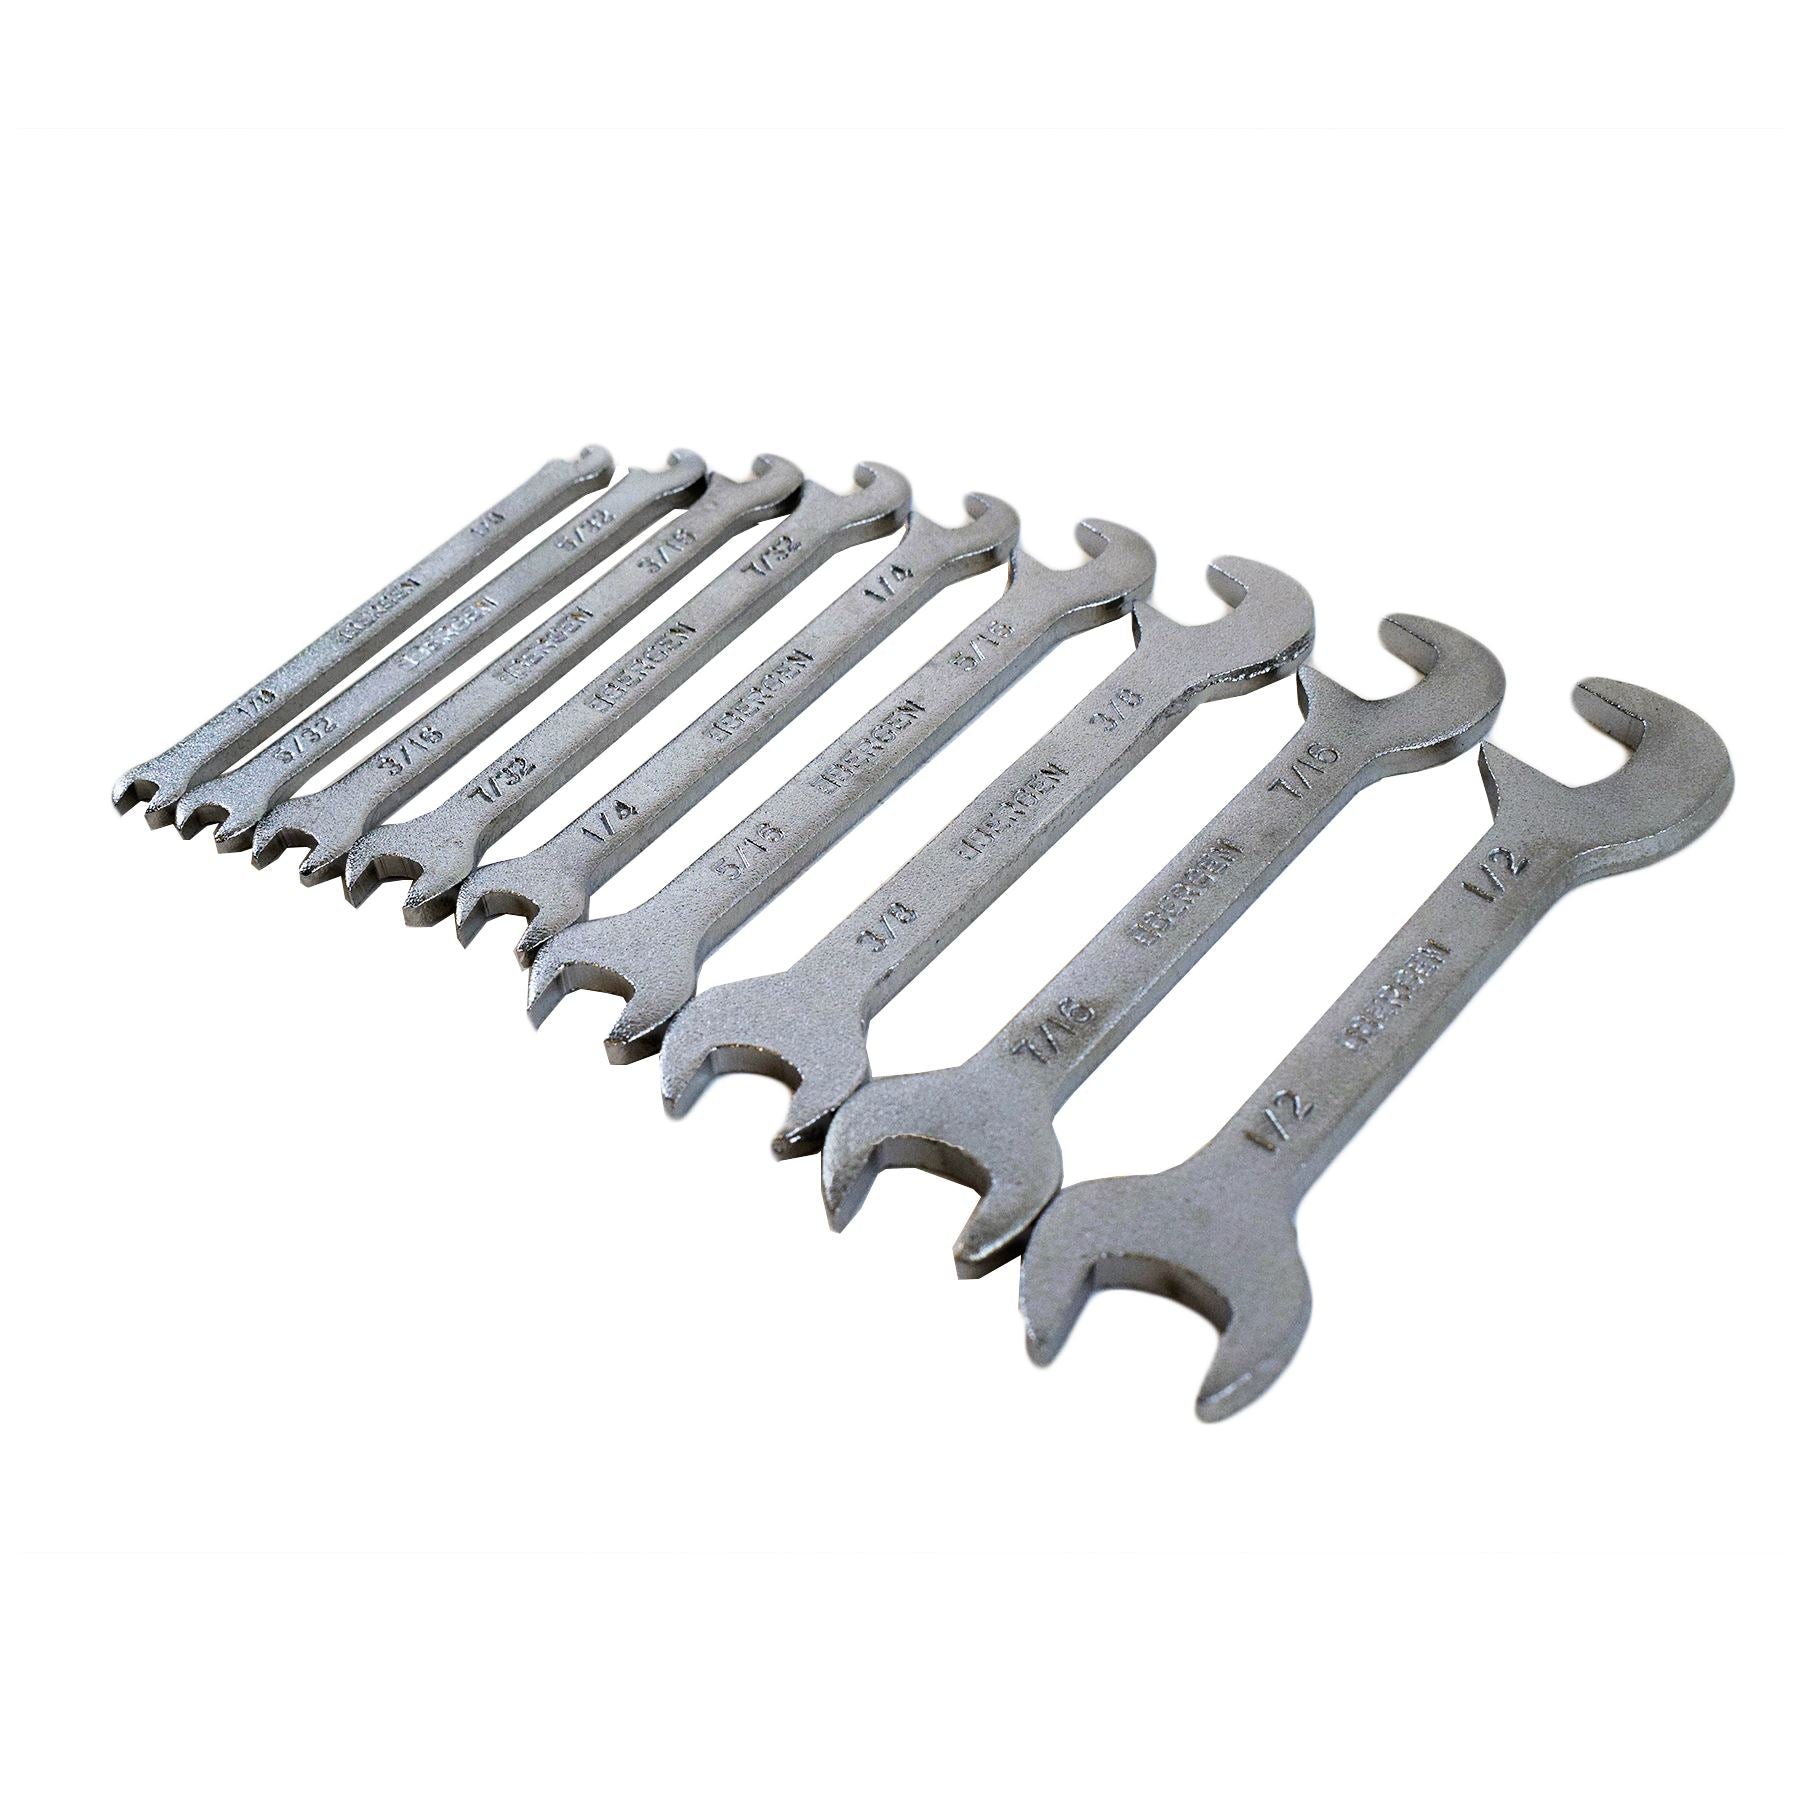 Mini Spanner Wrench Set Imperial SAE 9pc 1/8" - 1/2" Model Engineering Hobby